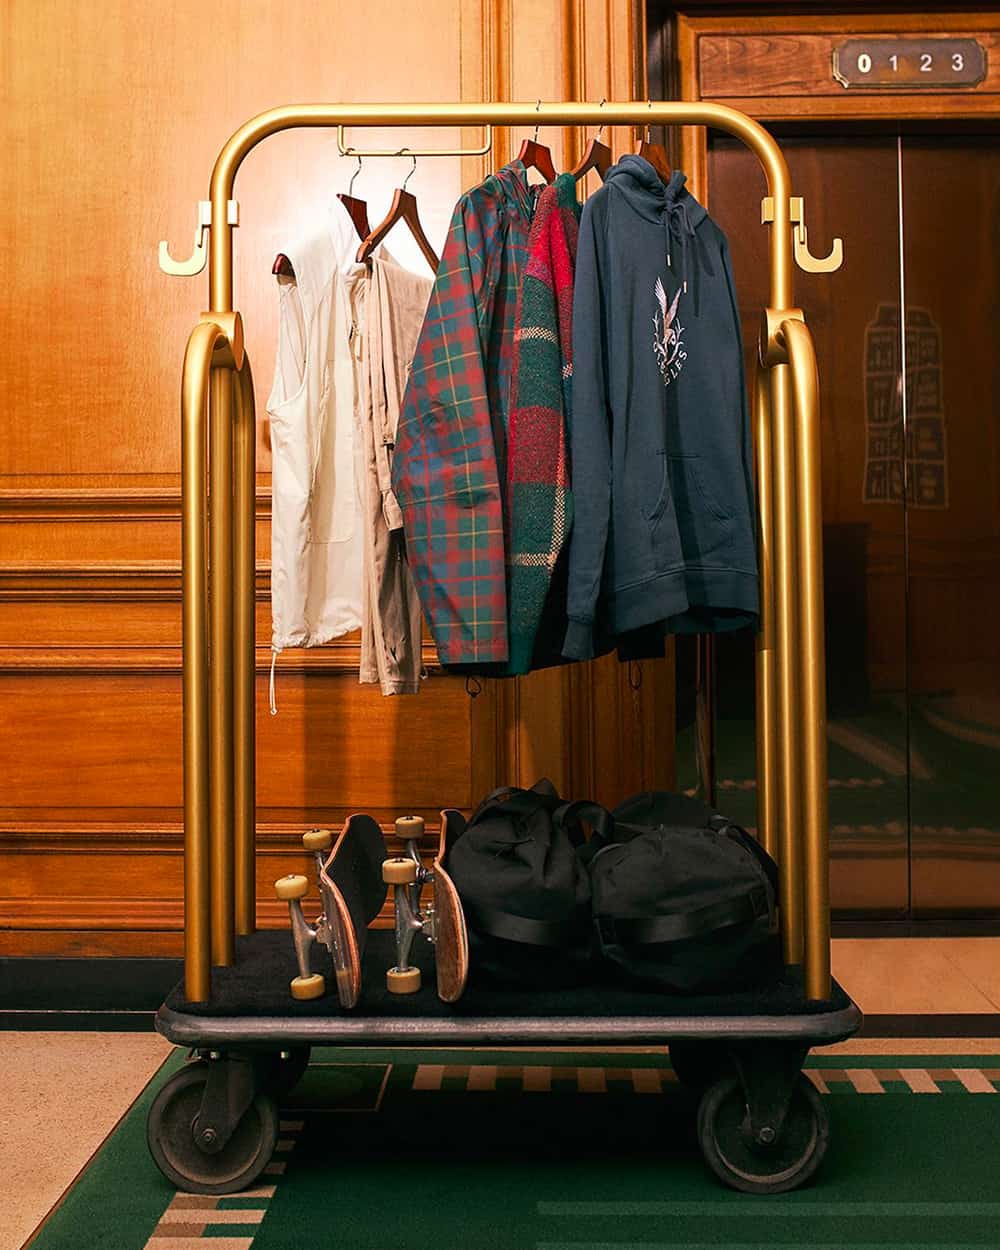 A hotel porter hanging rail with multiple Pop Trading Company skatewear pieces hanging on it, along with two skateboards